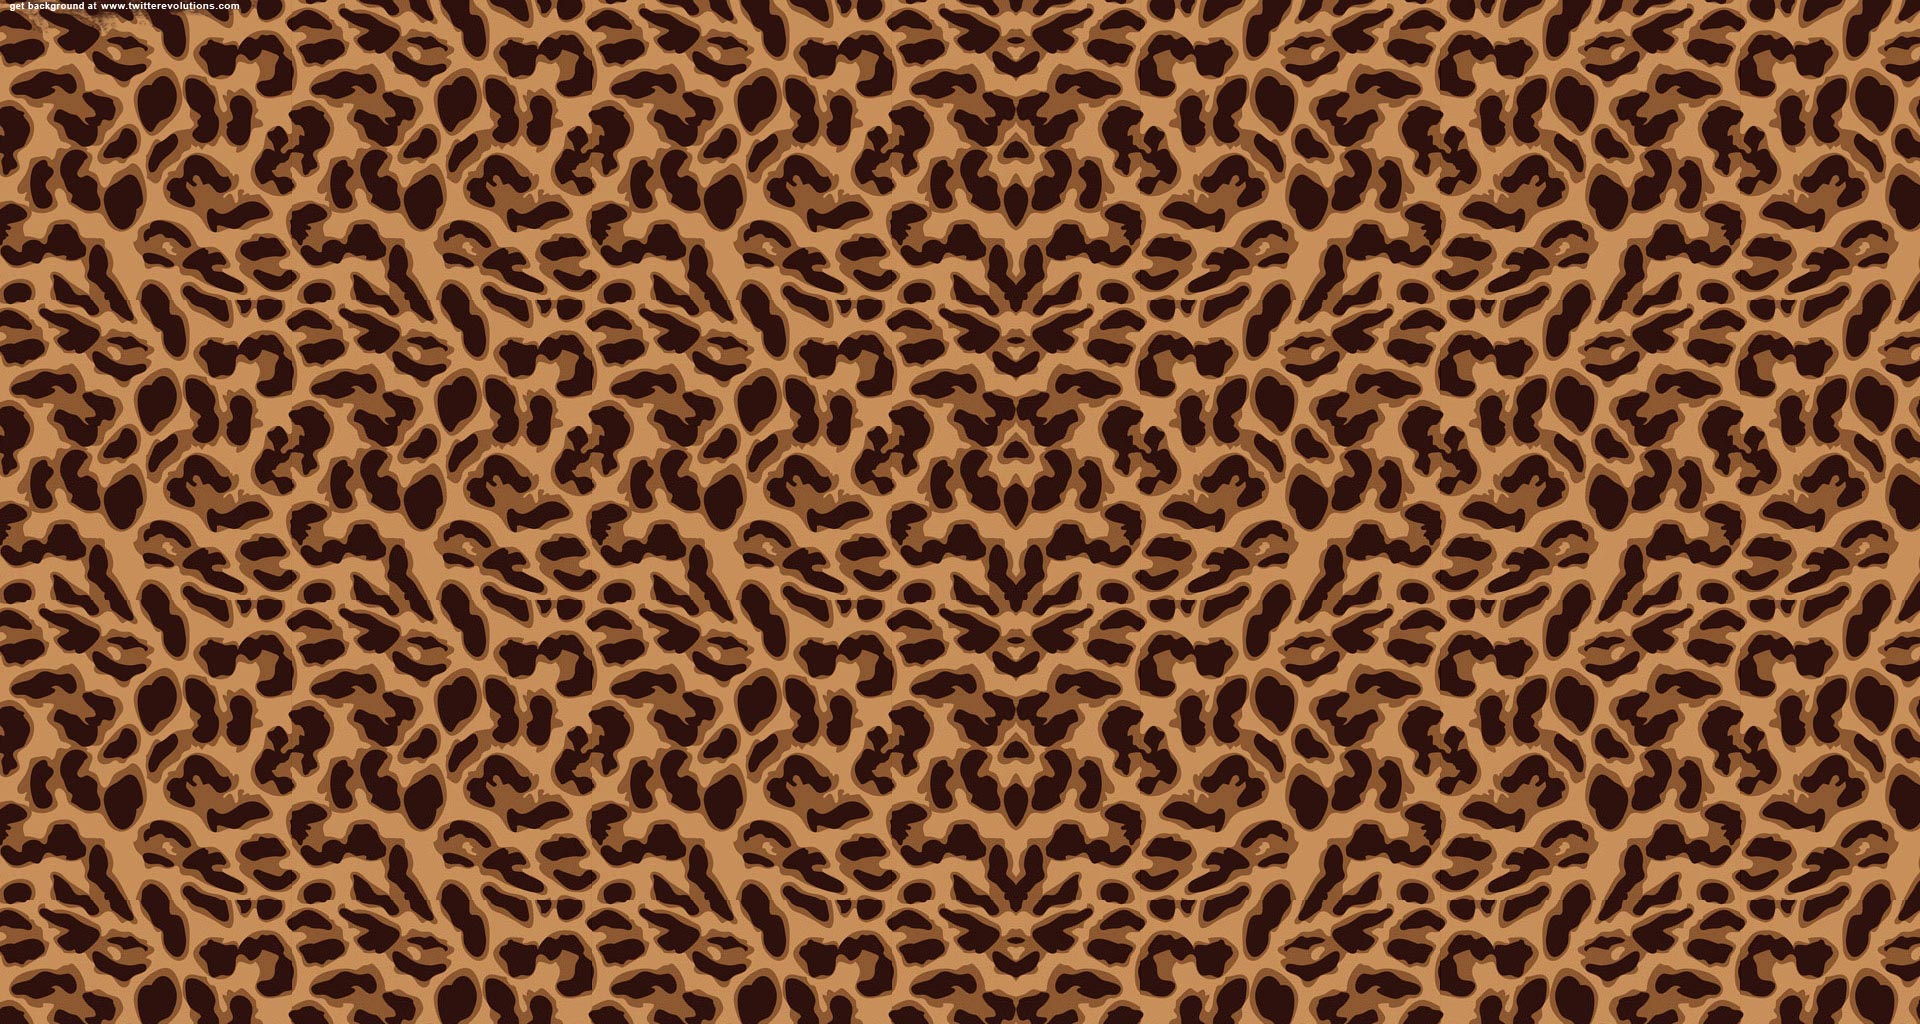 Gallery For gt Cheetah Print Backgrounds